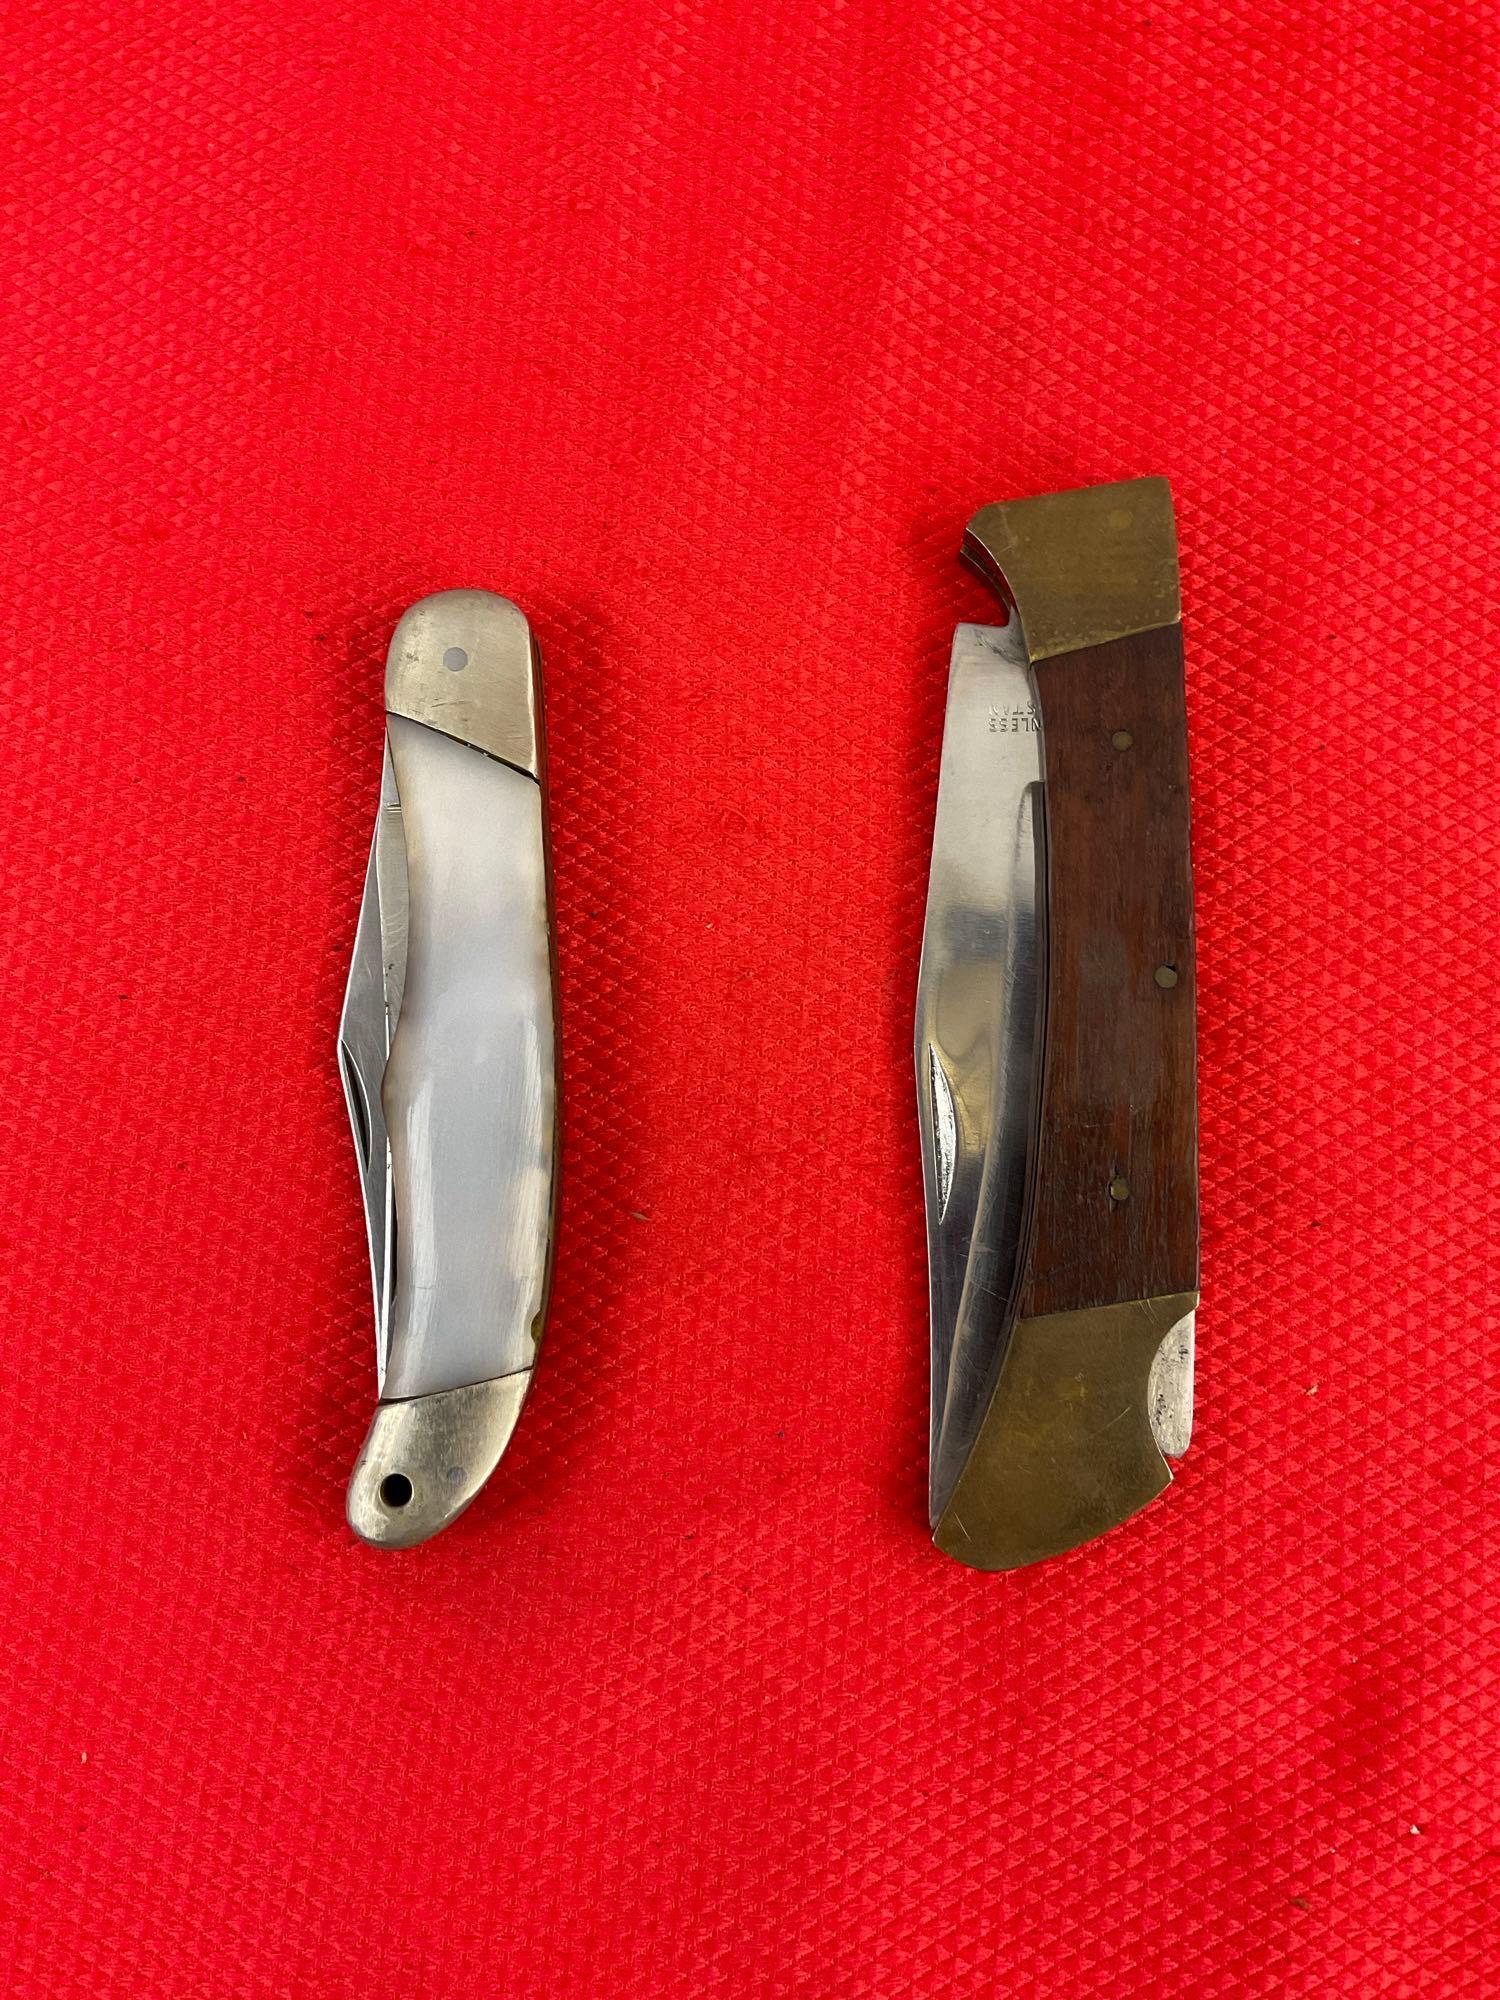 2 pcs Vintage Steel Folding Blade Knives. 1x Buck 317 & 1x Unknown Maker, No Hallmark. As Is. See